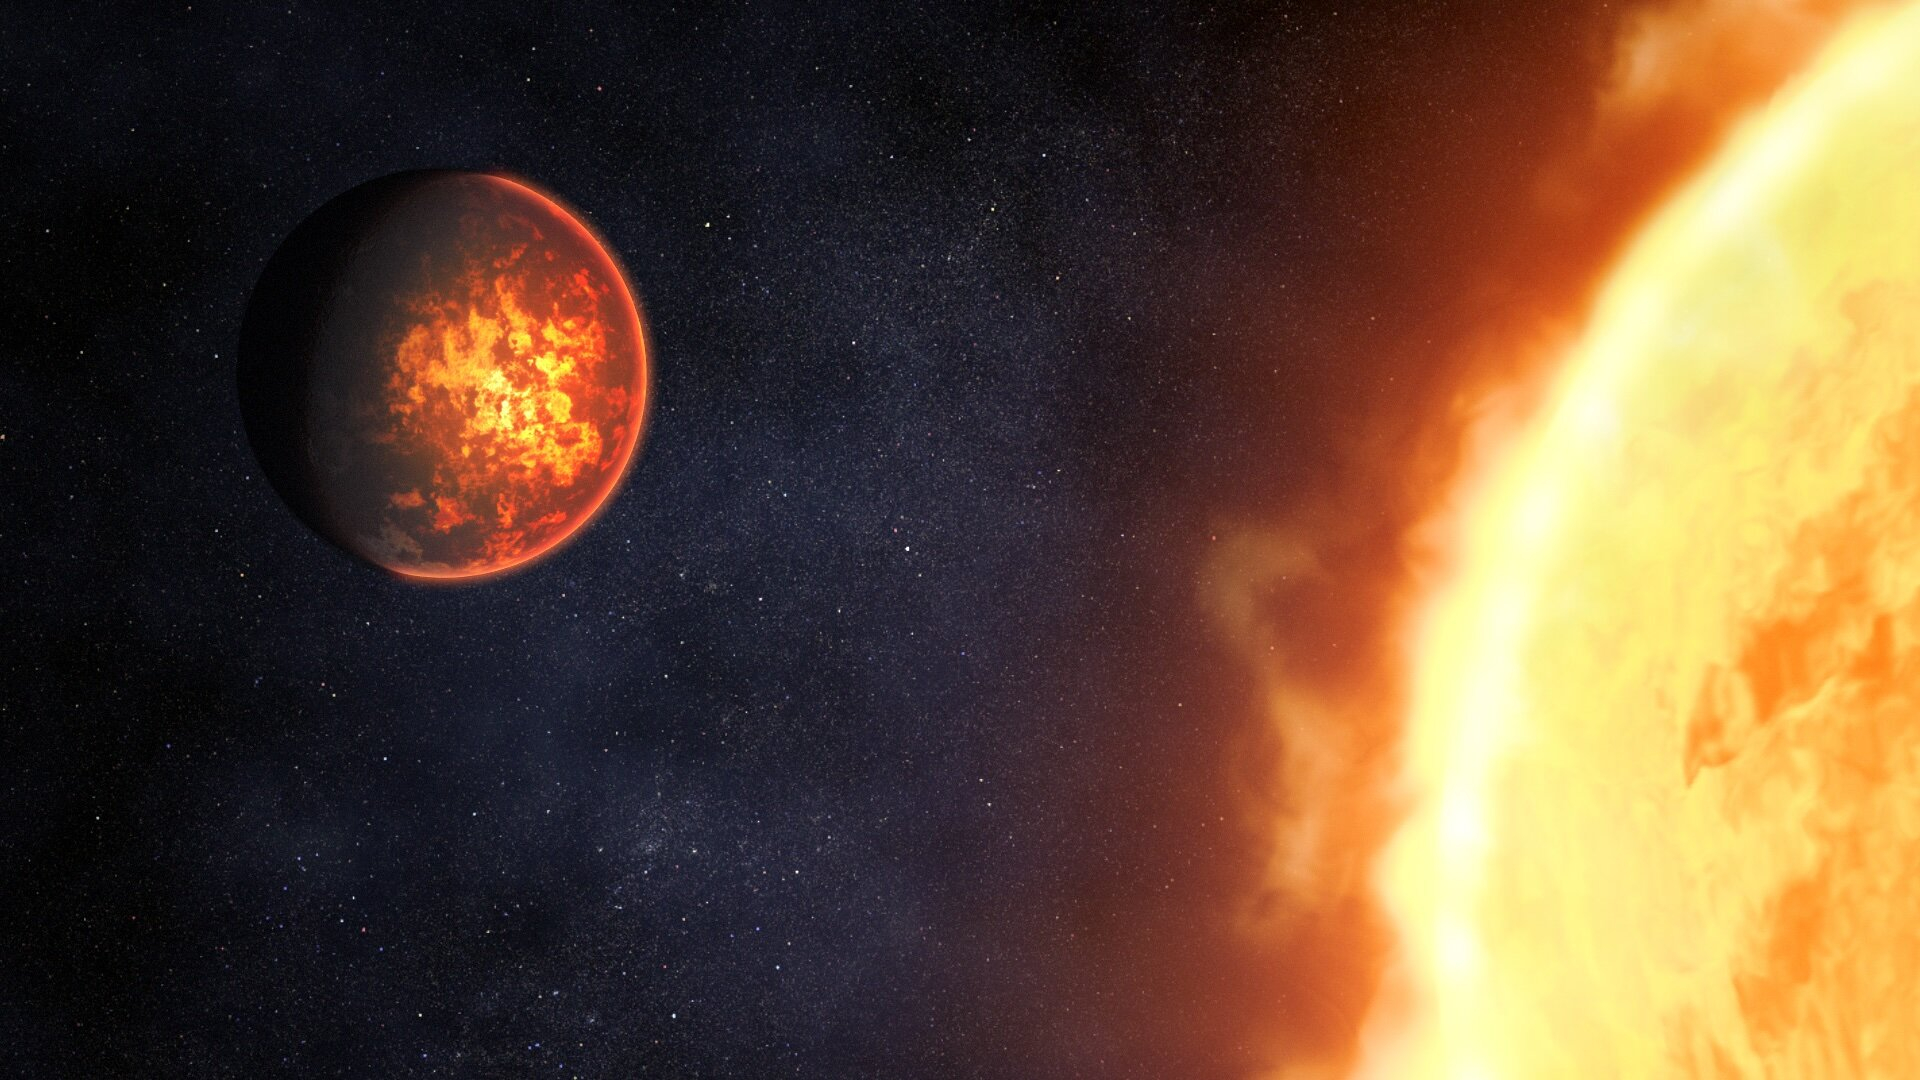 The surface of this volcanic exoplanet is hotter than some stars